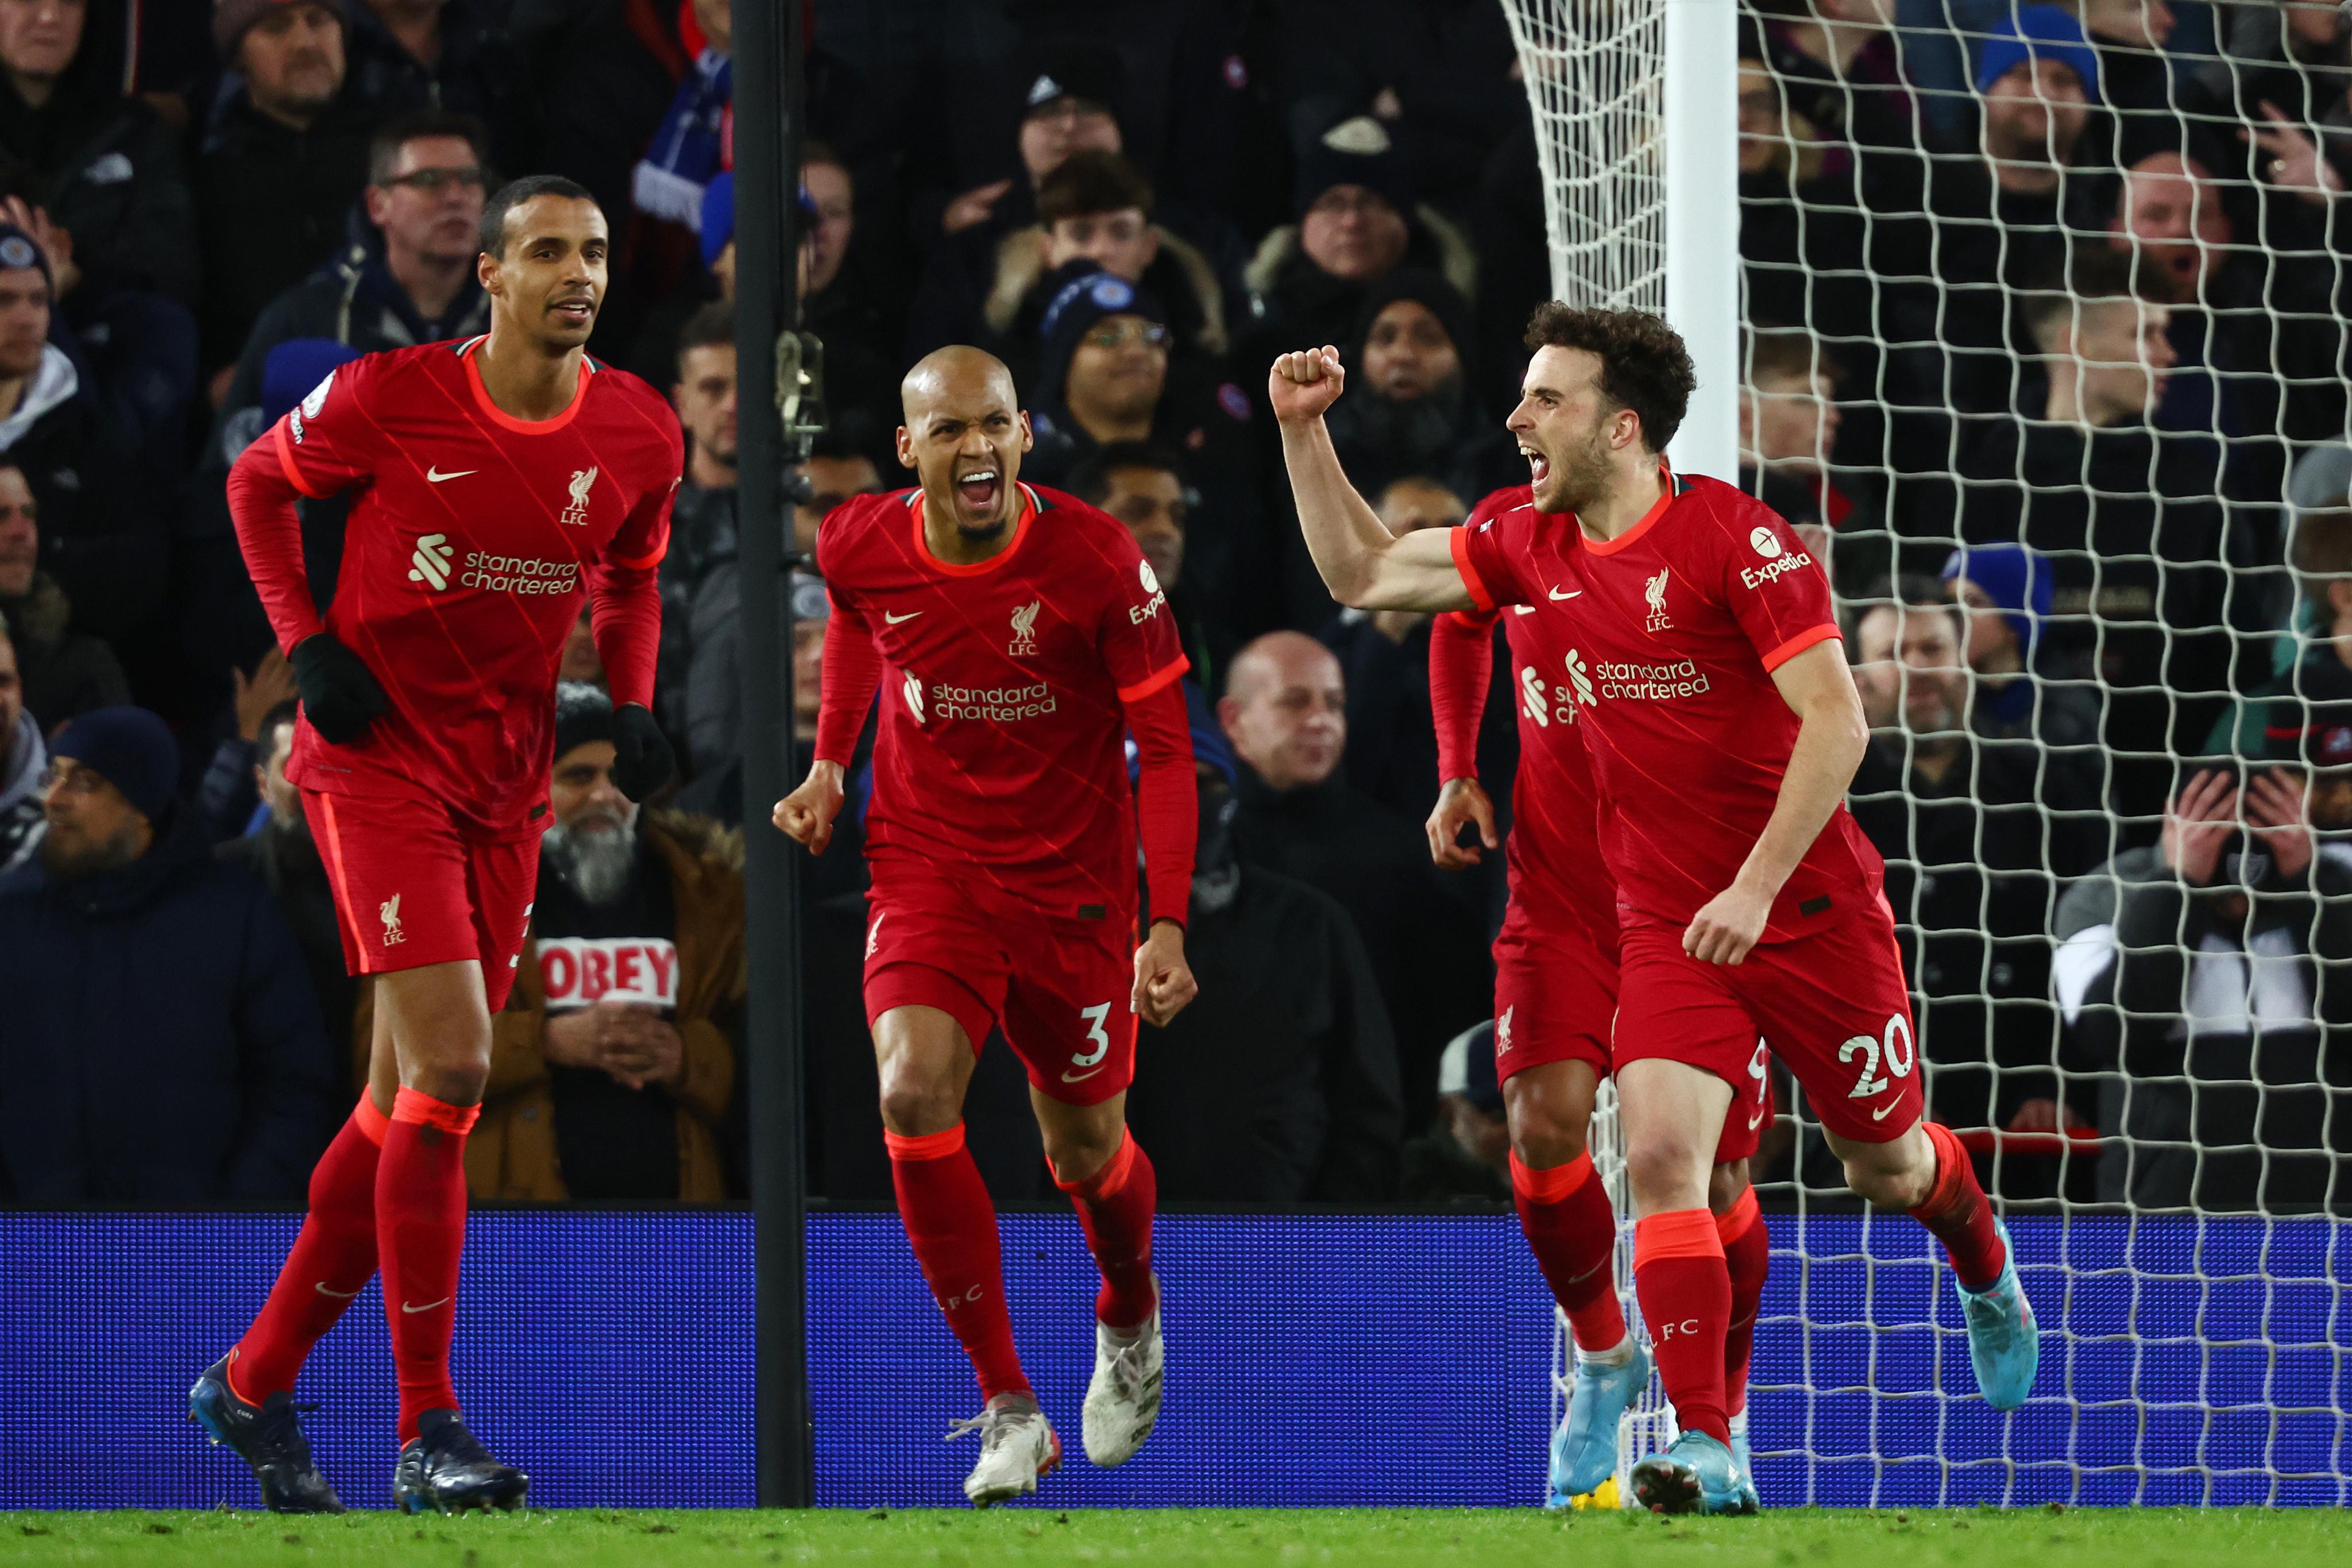 Liverpool beat Leicester City: Dominant Liverpool sweep past Leicester as Diogo Jota scores a brace in a 2-0 victory; Gap to Man City reduced to nine